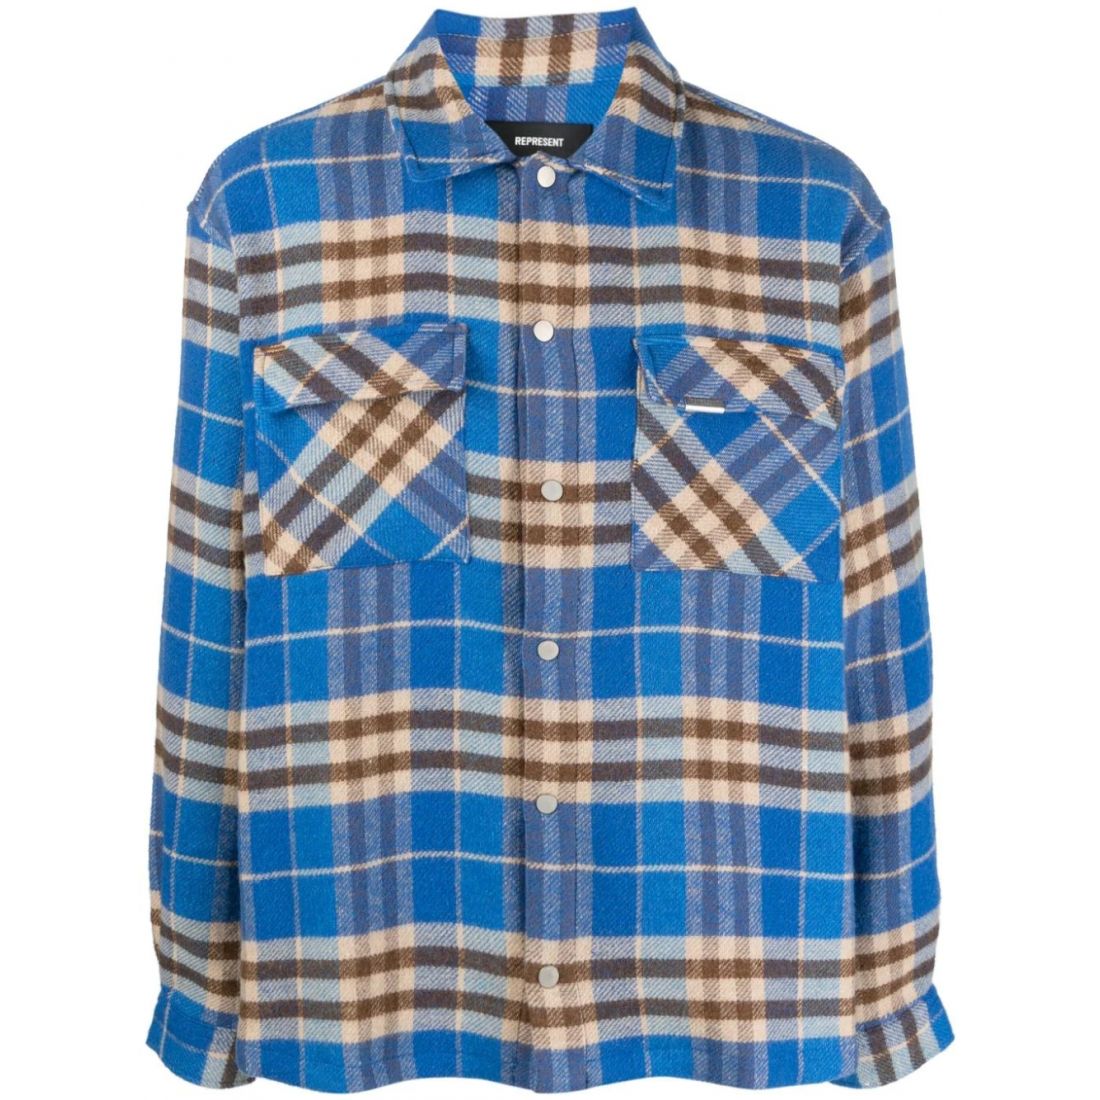 Represent - Chemise 'Checkered Buttoned' pour Hommes